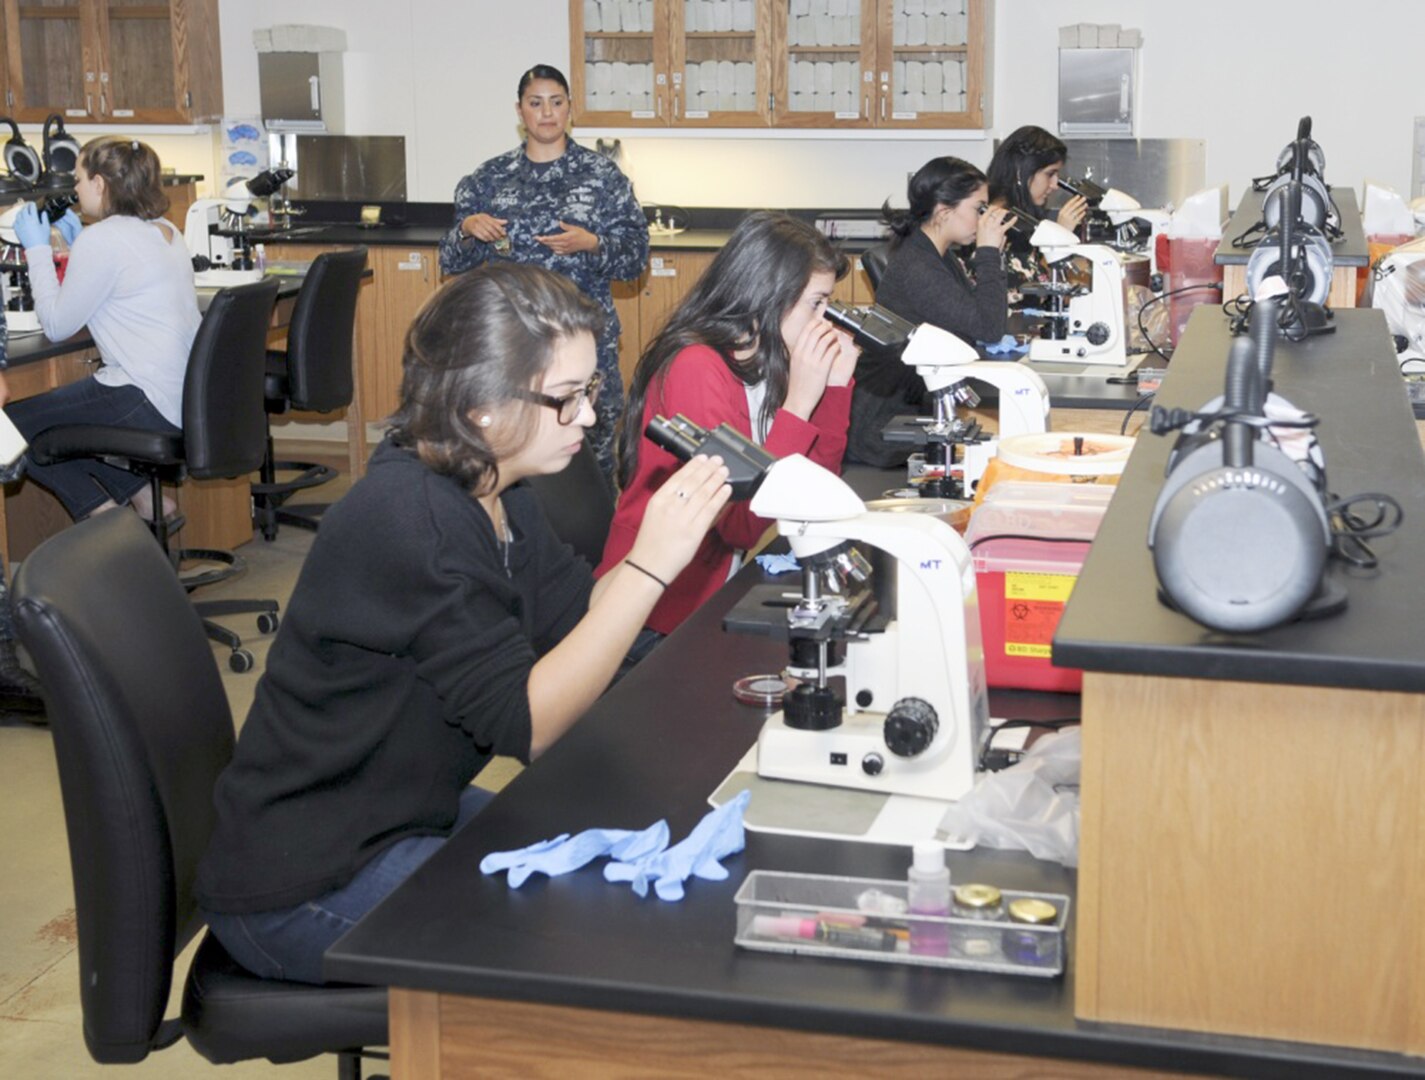 Petty Officer1st Class Elizabeth Sifuentes, a medical laboratory technician instructor at the Medical Education and Training Campus, talks to students from John Marshall High School while they look through microscopes during a tour of METC at Joint Base San Antonio-Fort Sam Houston. The tour was conducted by METC's Navy service component, Navy Medicine Training Support Center, as part of their Science, Technology, Engineering and Mathematics, or STEM, efforts.